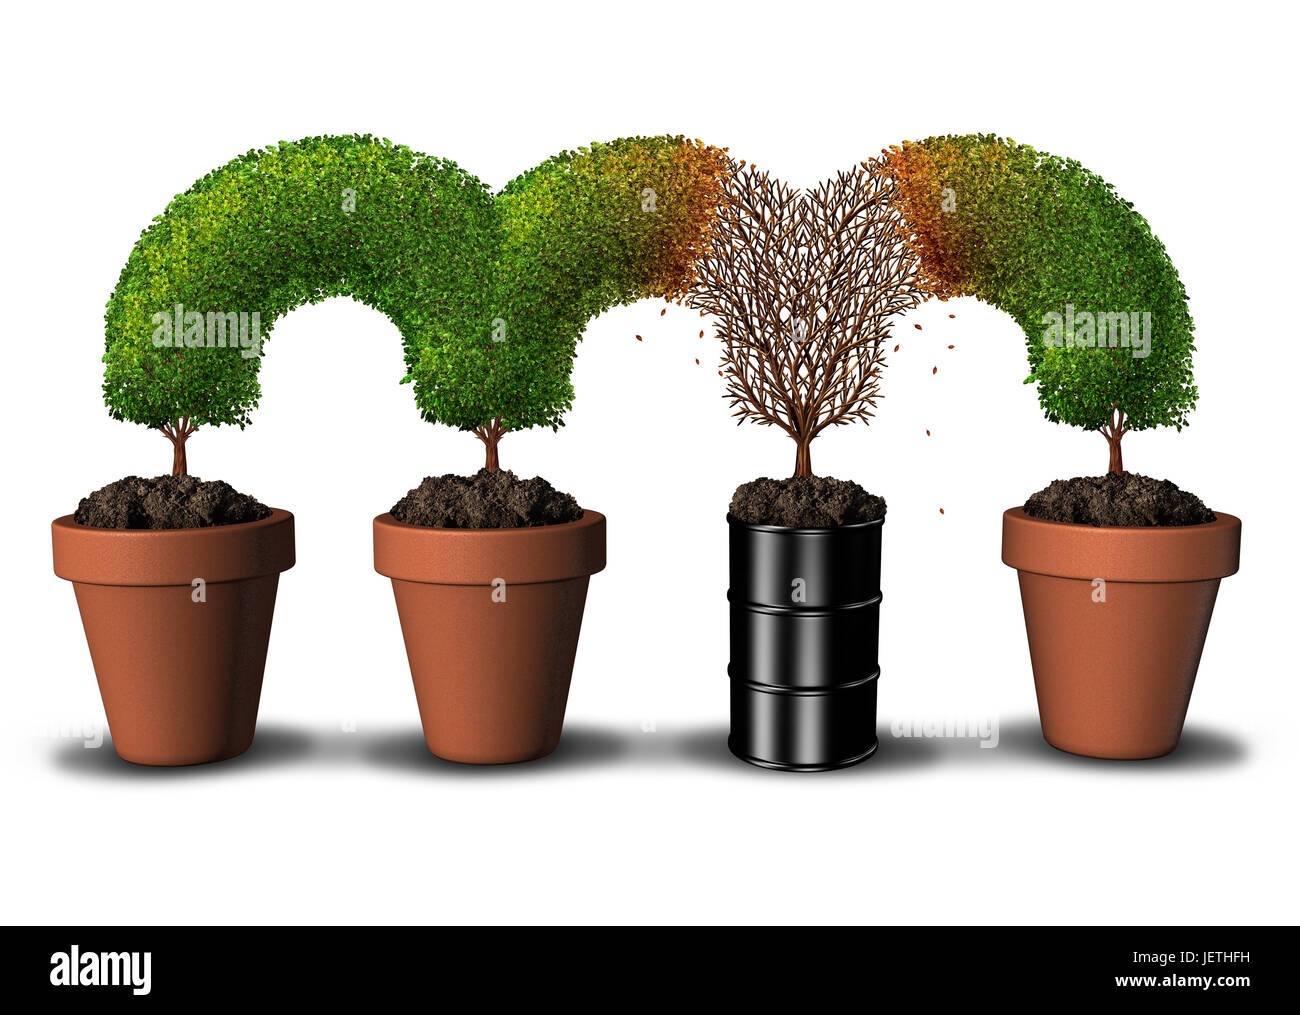 Contaminated environment concept with pollution and toxic contaminant in the soil as a dead tree segment growing in a a petroleum oil can. Stock Photo